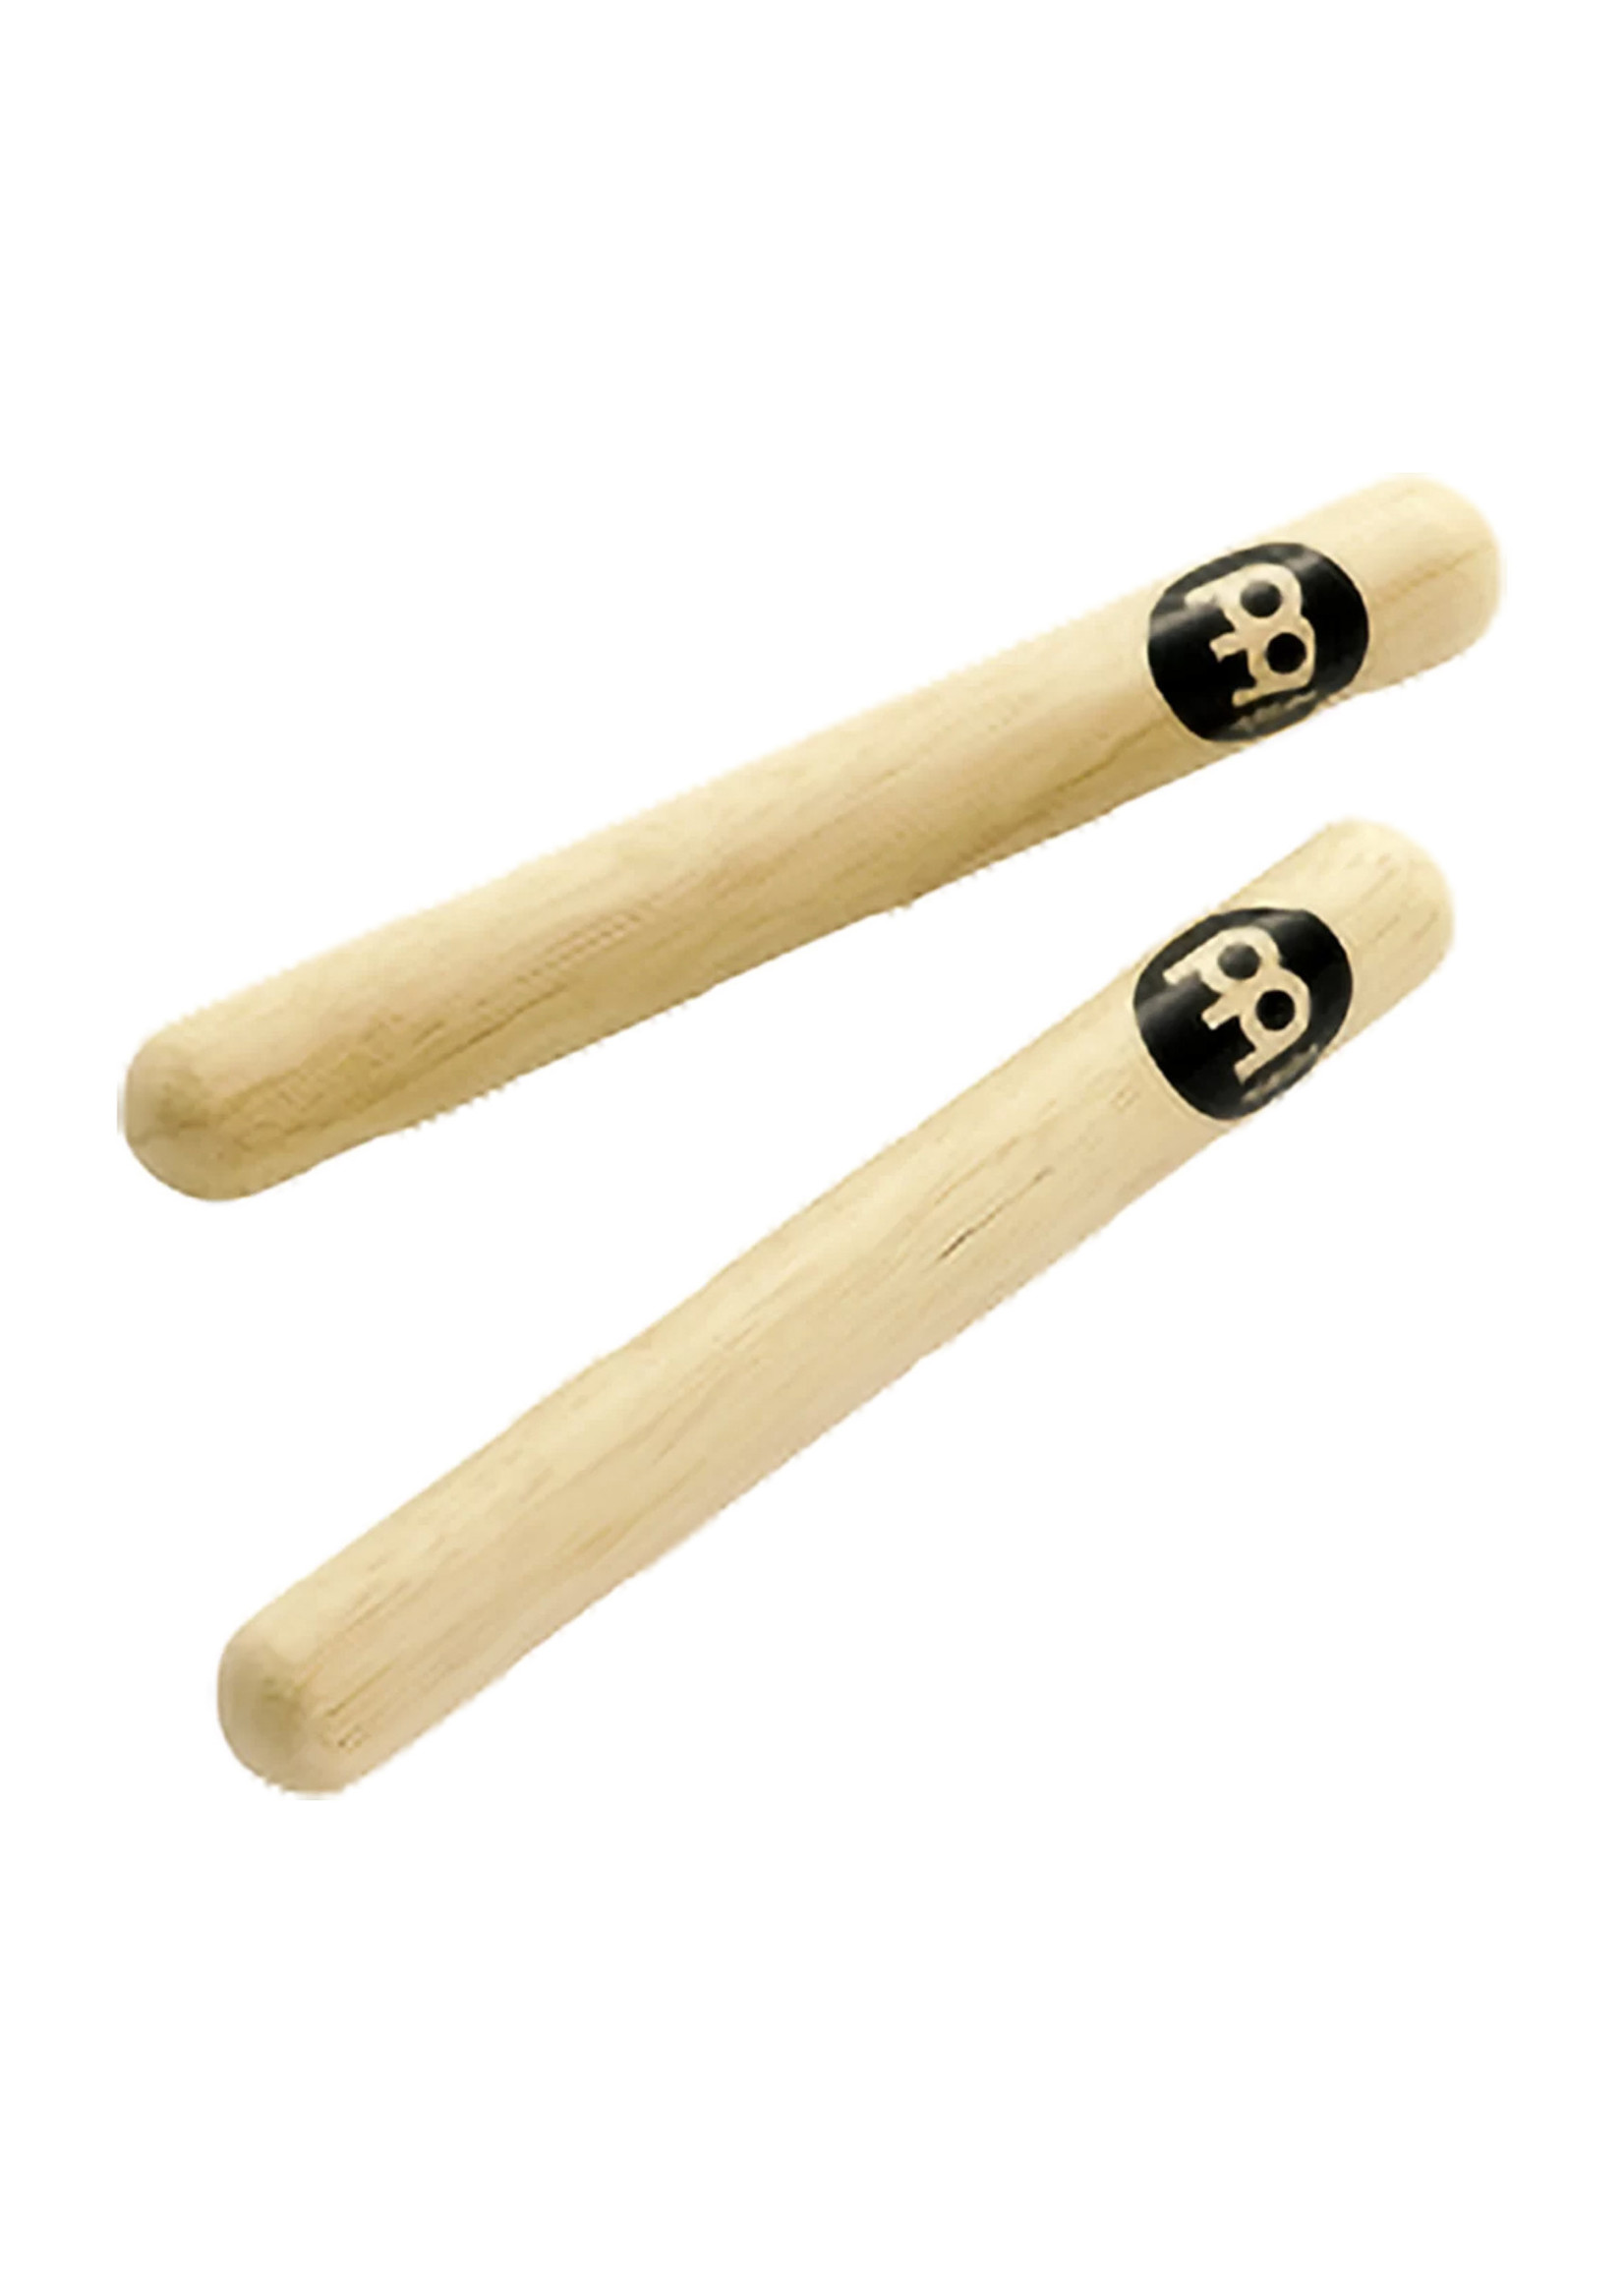 Meinl CL1HW Classic Wood Claves Natural